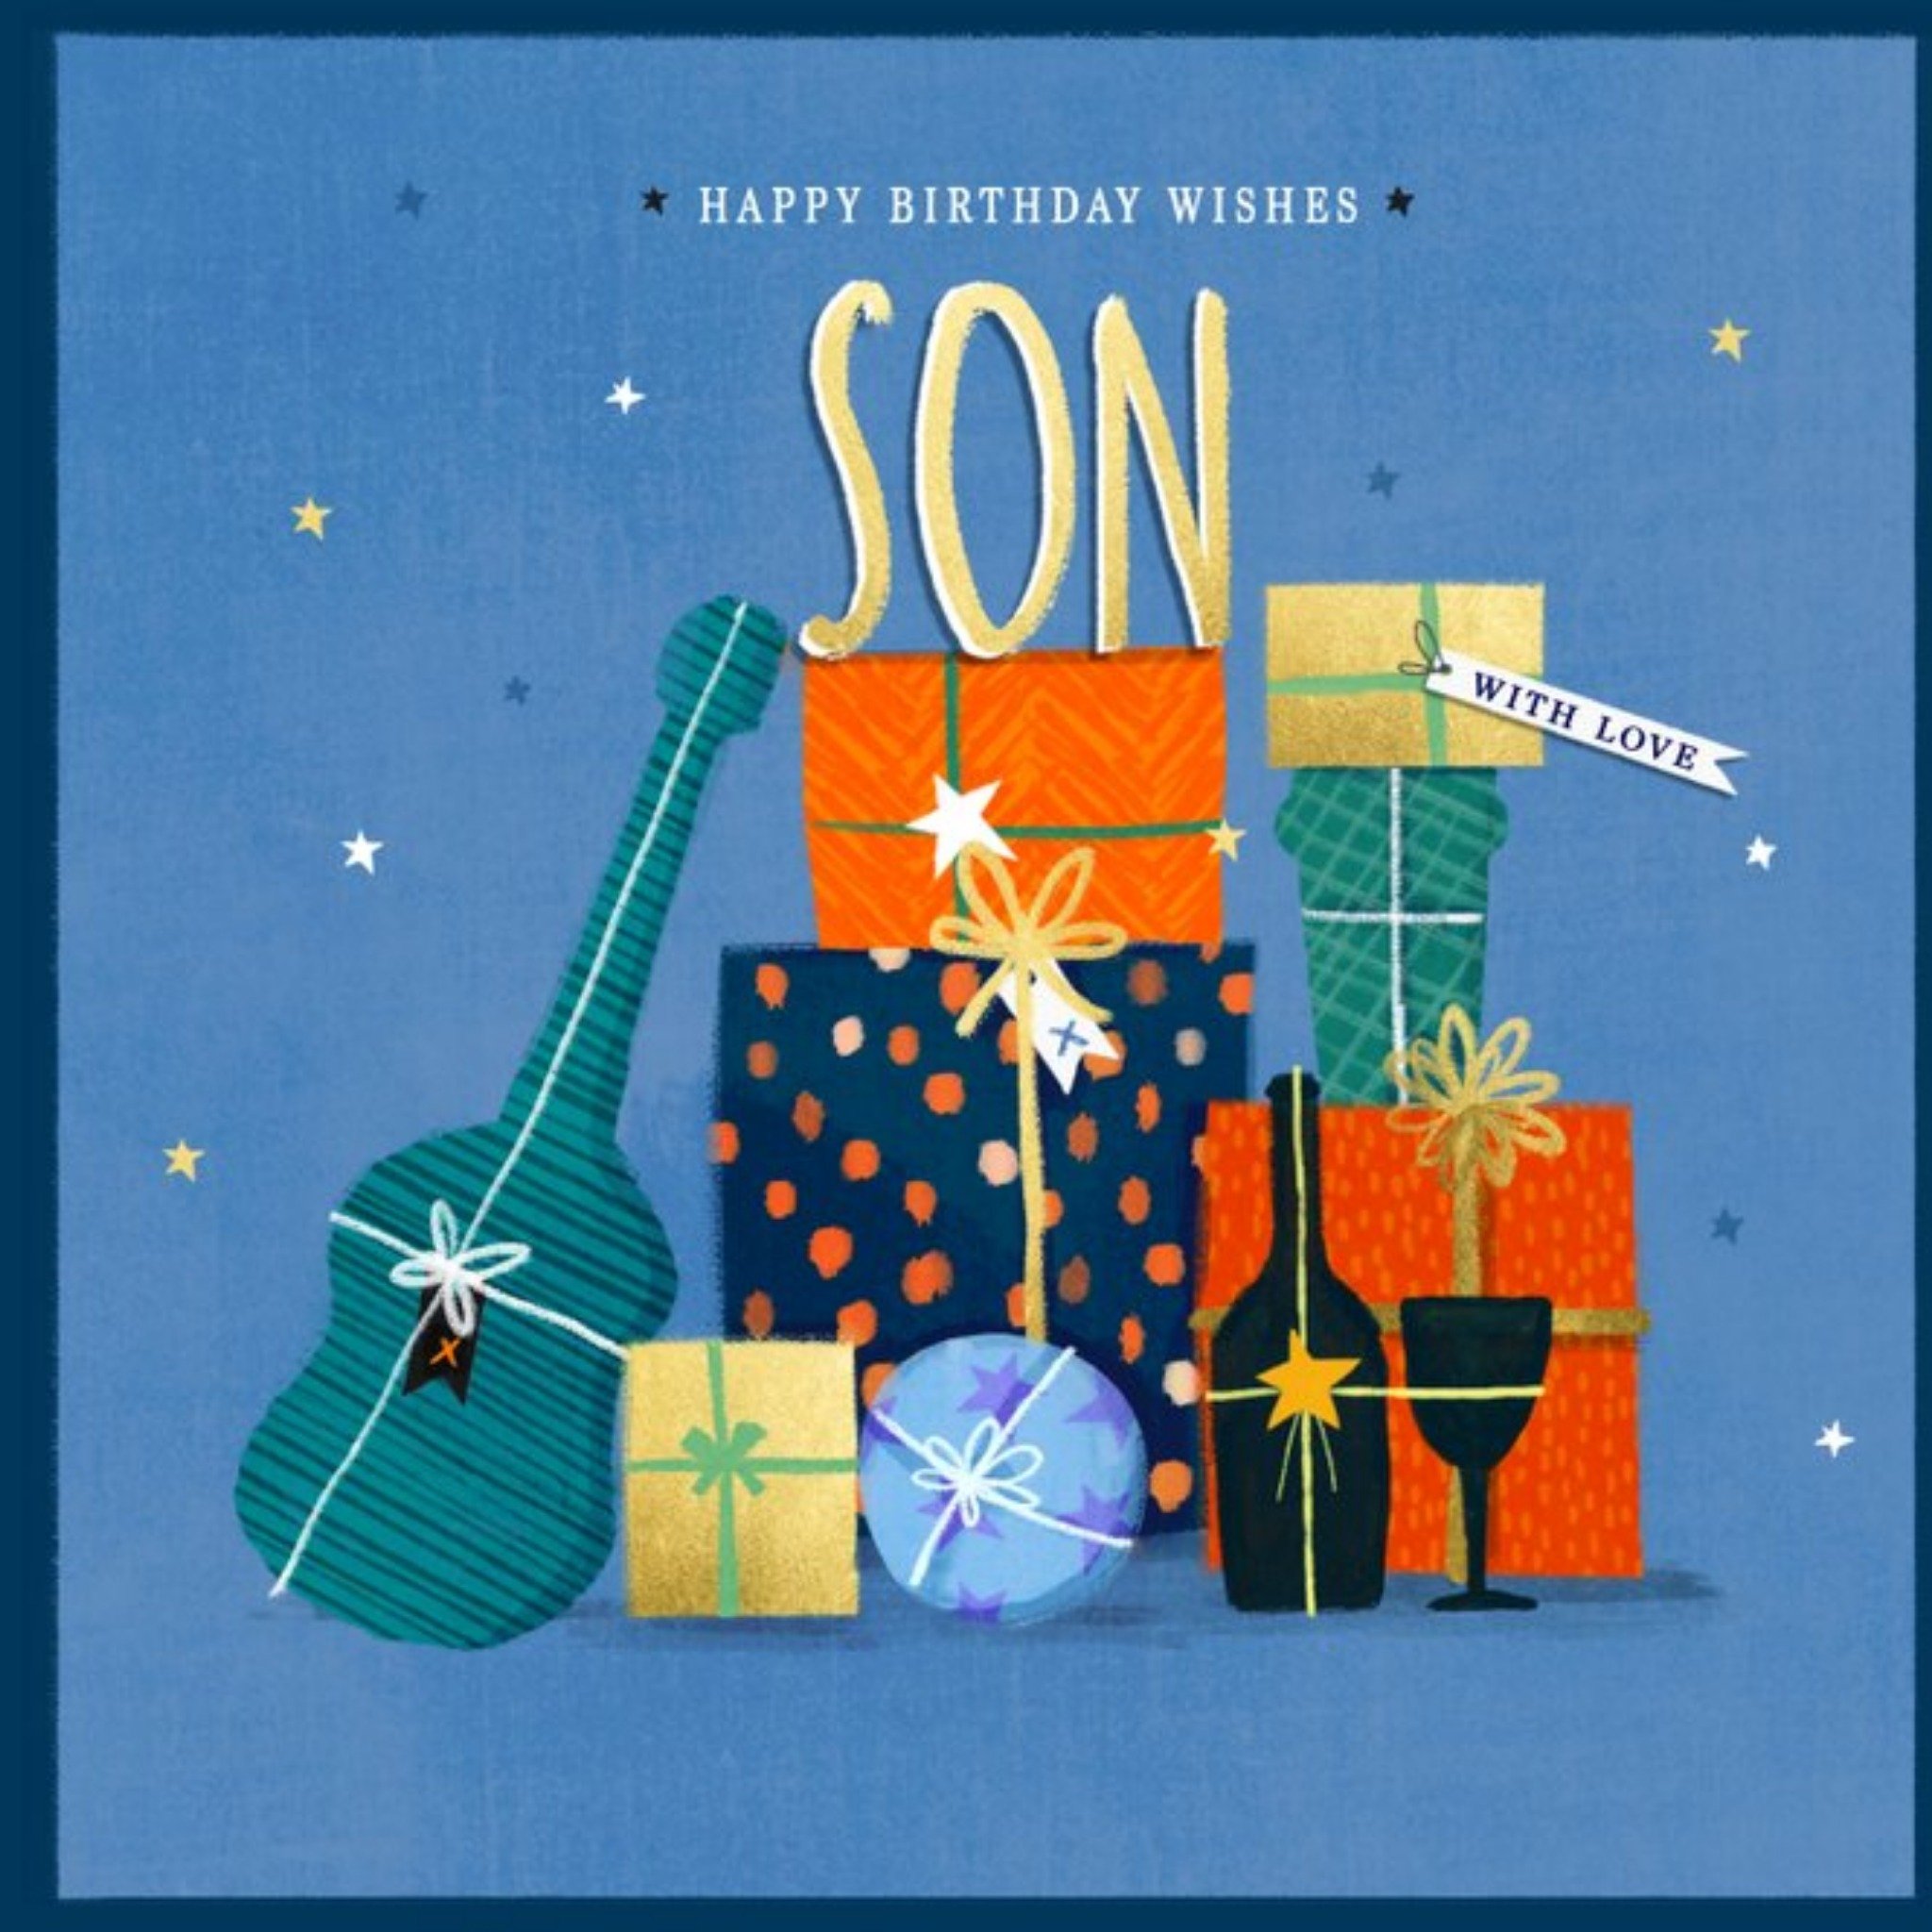 Moonpig Illustration Gifts Design Happy Birthday Wishes Son With Love Card, Square